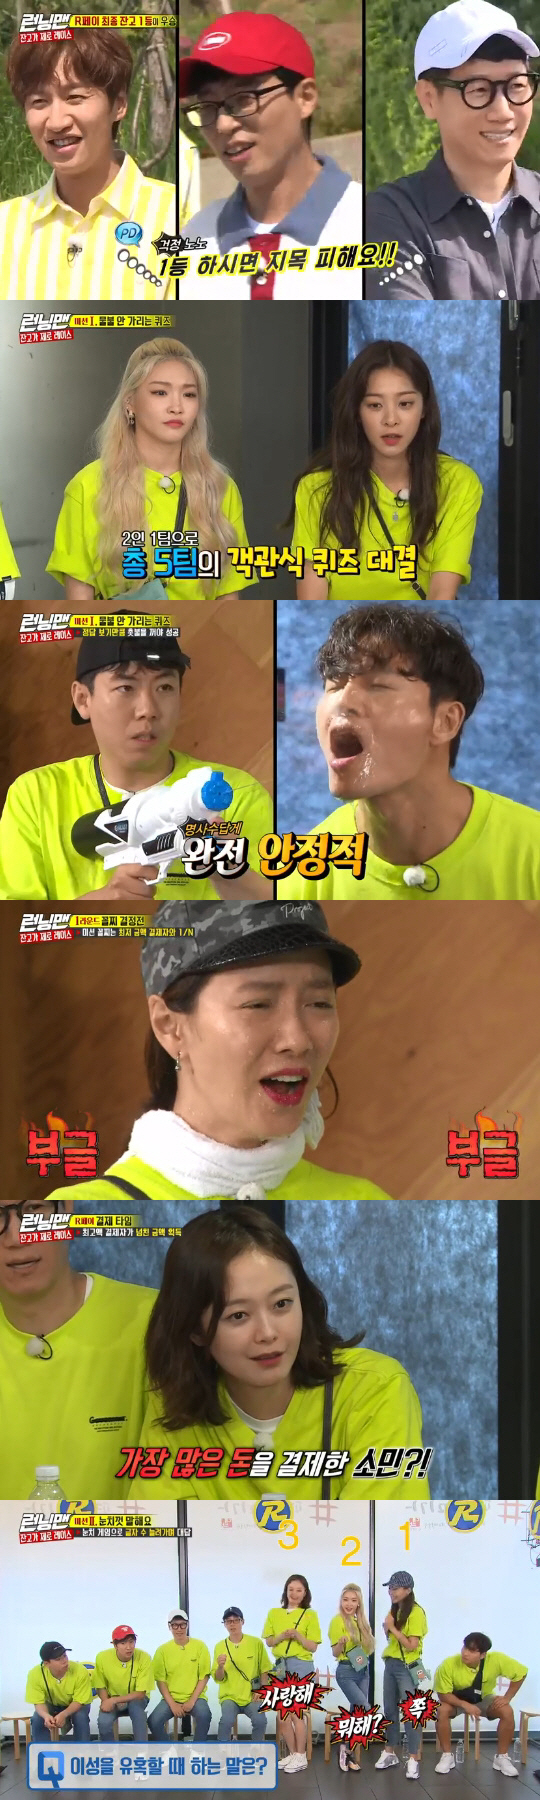 Running Man Yoo Jae-Suk won the final by defeating Lee Kwang-soo by 1,000 won.On SBS Running Man broadcasted on the afternoon of the 23rd, Zango Xero Race was held with Cheongha and Seol Ina appearing as guests.On this day, Race is a Xero Race that can win if you spend money well.Members who received a mission phone with Wang Feifei of 30,000 won will go to a restaurant and pay for food expenses, so they will pay privately with Wang Feifei.However, if the final amount is insufficient after the power payment, the last person in each round mission and the person who paid the least must pay the shortest amount.On the contrary, if the final amount is overflowing, the person who pays the highest amount will acquire all the difference.Kim Jong-kook expressed confidence that he should give it to his conscience.Yoo Jae-Suk then laughed, saying, We fight each other and Kim Jong-kook eats as a fisherman.With a fierce sense of fighting expected, the members visited the first mission site, the Lobster Shell Ribs Sticked Restaurant, where the members competed in a multiple quiz showdown with a team of two.Kim Jong-kook and Yang Se-chan, Cheongha and Seol In-ah, Yoo Jae-Suk and Haha got the right answer and won 1,000 won, and Song Ji-hyo was voted last and paid without food.The members who got the meal ticket finished the meal, and the payment time came.The total payment amount was 25,000 won, and Yoo Jae-Suk was the first to confidently say, I will pay 10,000 won so that you do not have to pay. However, the actual payment amount was 2,000 won.Most of the members paid 2,000 won to avoid losing money, while Seol In-ah paid 5,000 won and Jeon So-min paid 10,000 won.As a result, the total settlement amount exceeded 4,000 won, and the additional 4,000 won was paid to Jeon So-min, who paid the most.Still, Jeon So-min lost 6,000 won. The best beneficiary was Song Ji-hyo.Song Ji-hyo paid 0 won to watch the trend as much as possible and did not lose a penny even though it was last.The second mission site is a beef sashimi steamed restaurant, where members have started to acquire a meal ticket through a game.Lee Kwang-soo, Kim Jong-kook, Cheongha and Yoo Jae-Suk won the meal ticket through Game.Cheung, who even won the last spot, chose Yang Se-chan as the last.It was time for the members to pay after dinner again. The total payment was 19,000 won, which is cheaper than the first.Haha and Lee Kwang-soo, who expected the settlement to overflow, paid 0 won, and Song Ji-hyo and Seol In-ah, who aimed for excess amount as the first settlement amount, paid 10,000 won each.As a result, 29,000 won, which exceeded 10,000 won, was collected, and Song Ji-hyo and Seol In-ah, who became the first settlement, lost 5,000 won each.The members arrived at the final mission site for the last mission to the end.The final mission is to succeed if you kick the ball toward the target and attach it to the passing target in the center of the center. If it is attached to the penalty target, you will be punished by the person in the order before you (?)Mission. But the members kicked the ball stretching toward the penalty target, not the passing target.The members were punished for wearing unusual hats and color spray dyeing, and they completed the visuals of the past and laughed.Yoo Jae-Suk, who won the championship at the end of twists and turns, finished the meal with Song Ji-hyo and Jeon So-min, and it was the last payment time.Lee Kwang-soo, who had paid 0 won earlier, was in charge of all 21,000 won in all assets in order to win the final.However, Yoo Jae-Suk, who was 1,000 won more than Lee Kwang-soo, also made an All In strategy, and Yoo Jae-Suk won the final championship by 1,000 won.Lee Kwang-soo, who paid all the property, was automatically penalized with a balance of 0 won, and Seol In-ah, who made a big payment every round, was penalized with the last balance except Lee Kwang-soo.Seol In-ah pointed to Ji Suk-jin as a companion penalty, while Lee Kwang-soo, Seol In-ah and Ji Suk-jin performed water bomb penalties side by side.